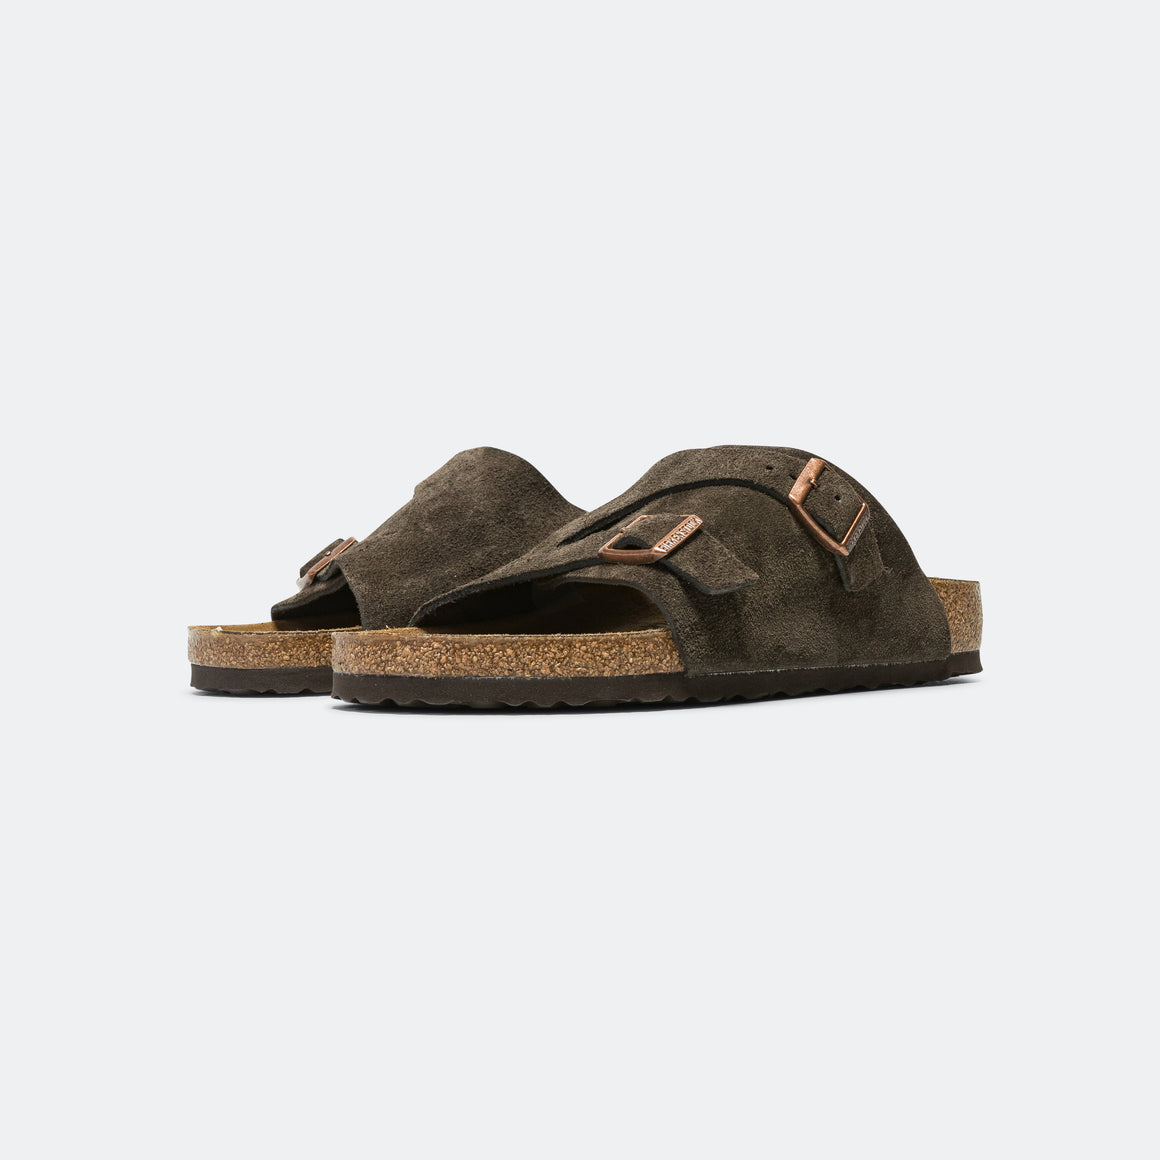 Birkenstock - Zurich - Mocca Suede Leather - UP THERE